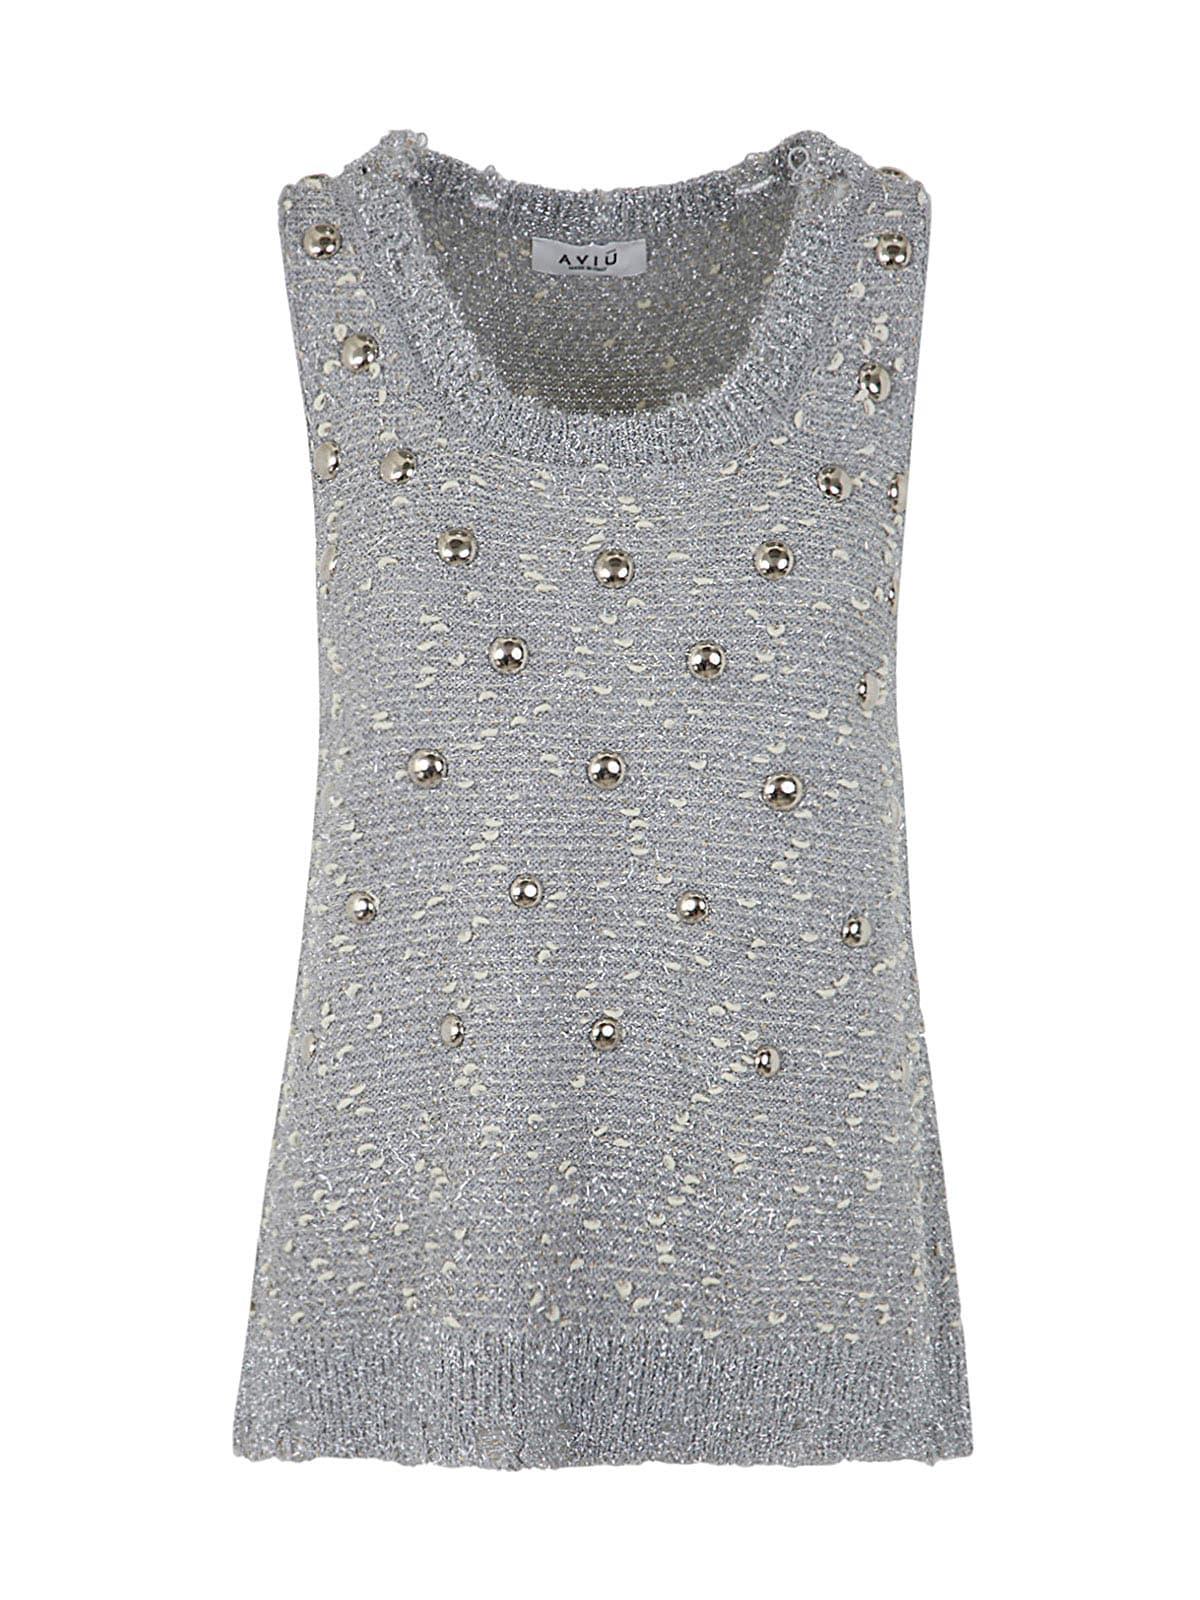 Aviu Top With Studs in Gray | Lyst